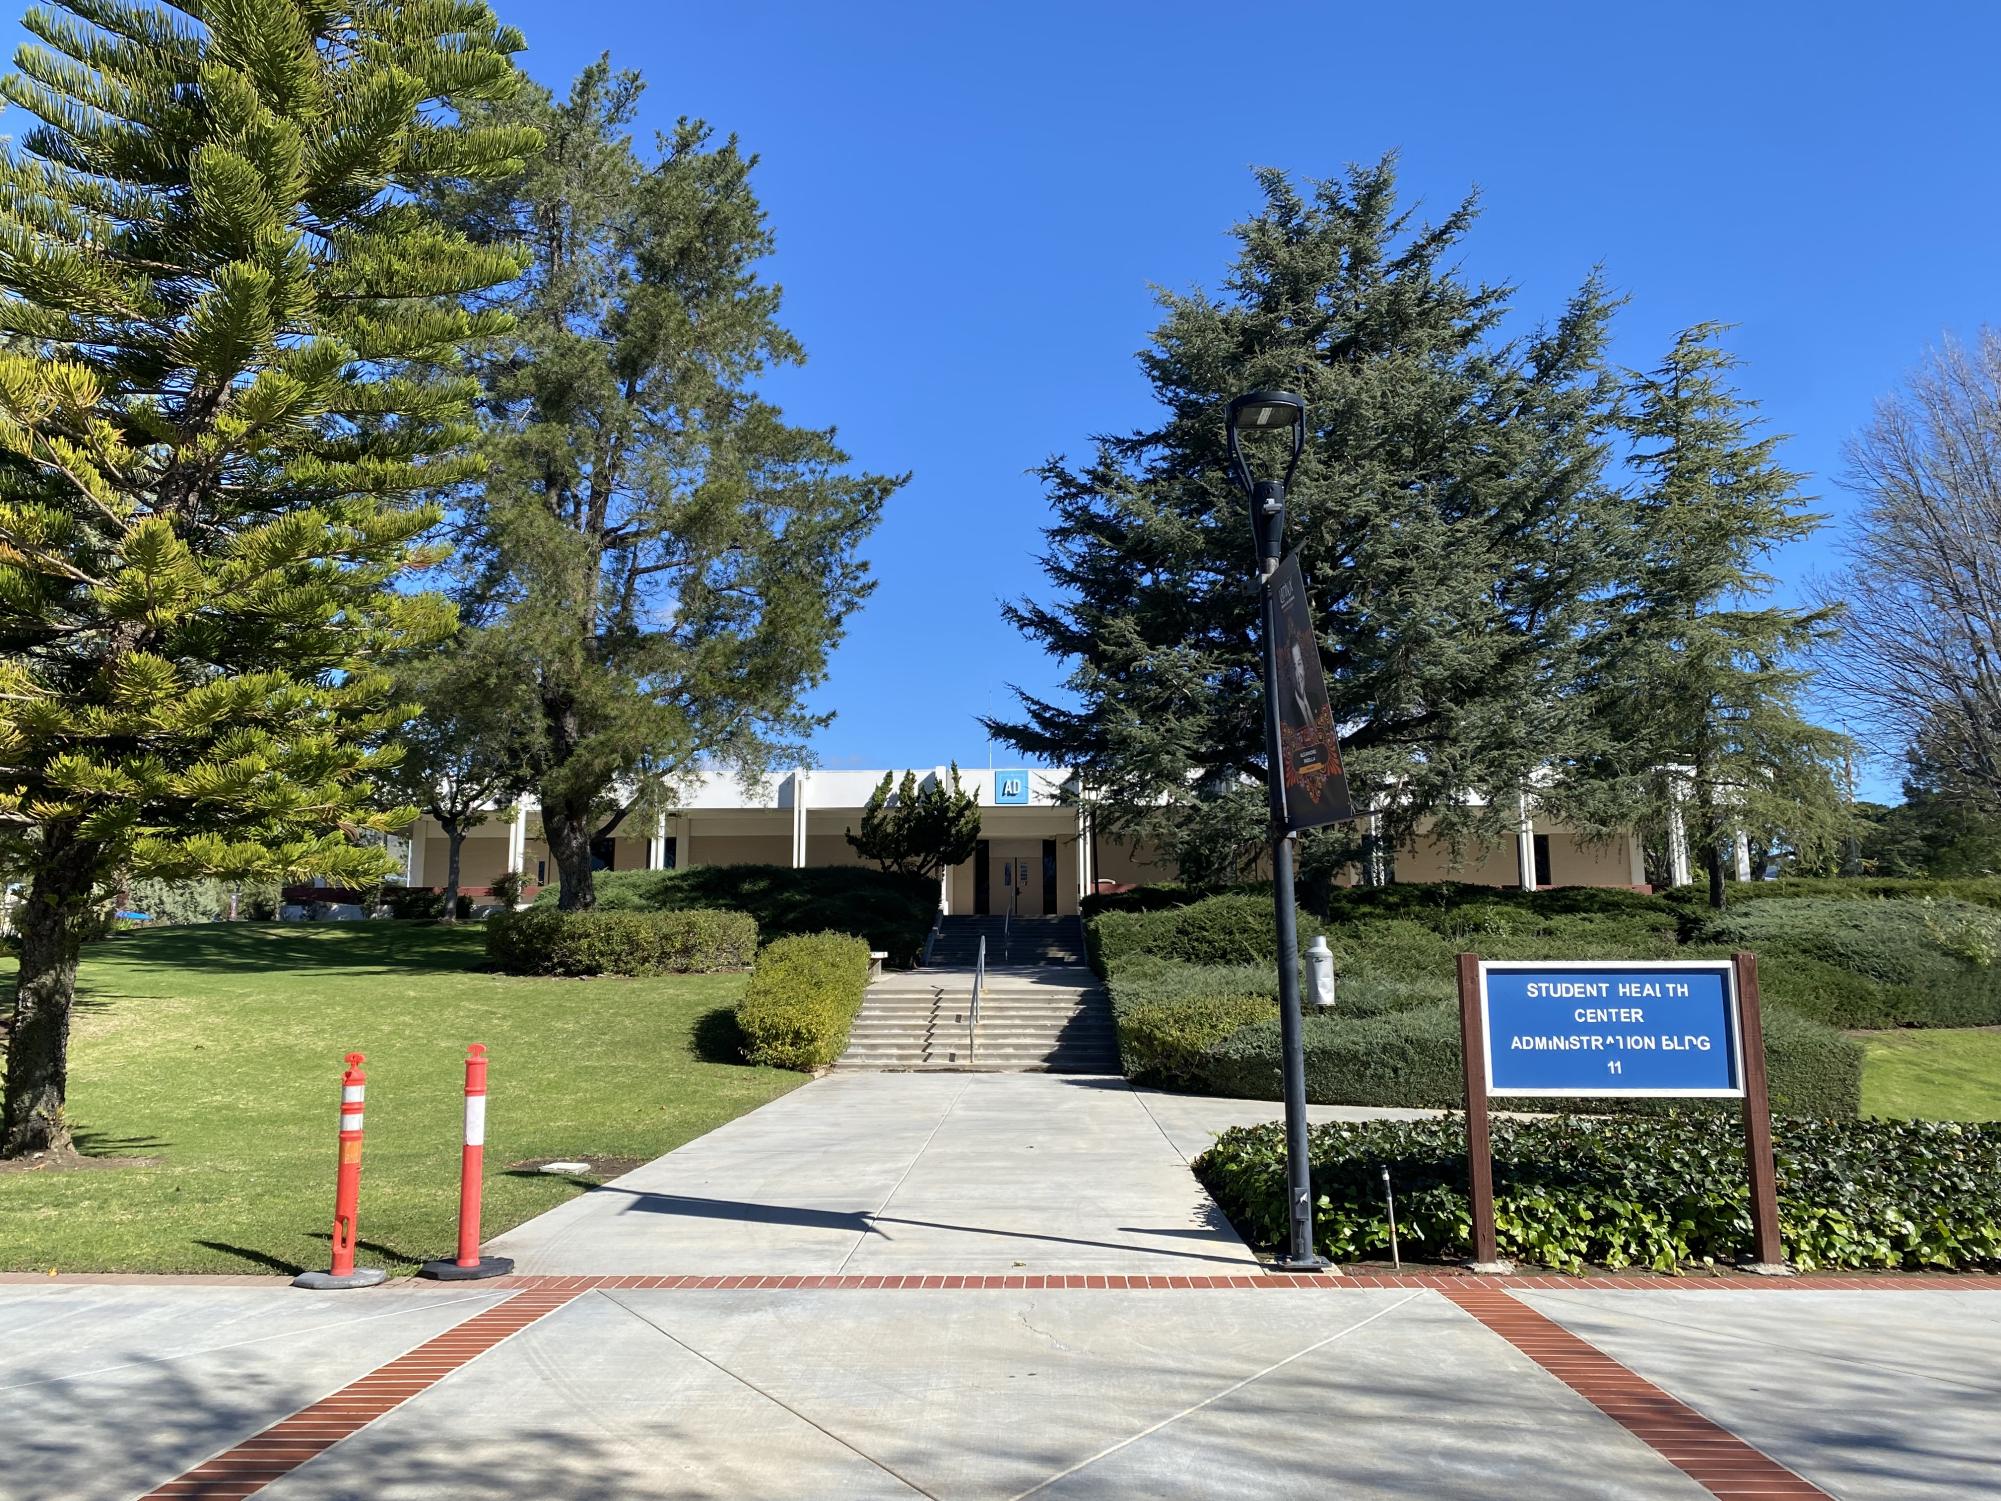 The front of the Administration Building where the Moorpark College Student Health center is located.